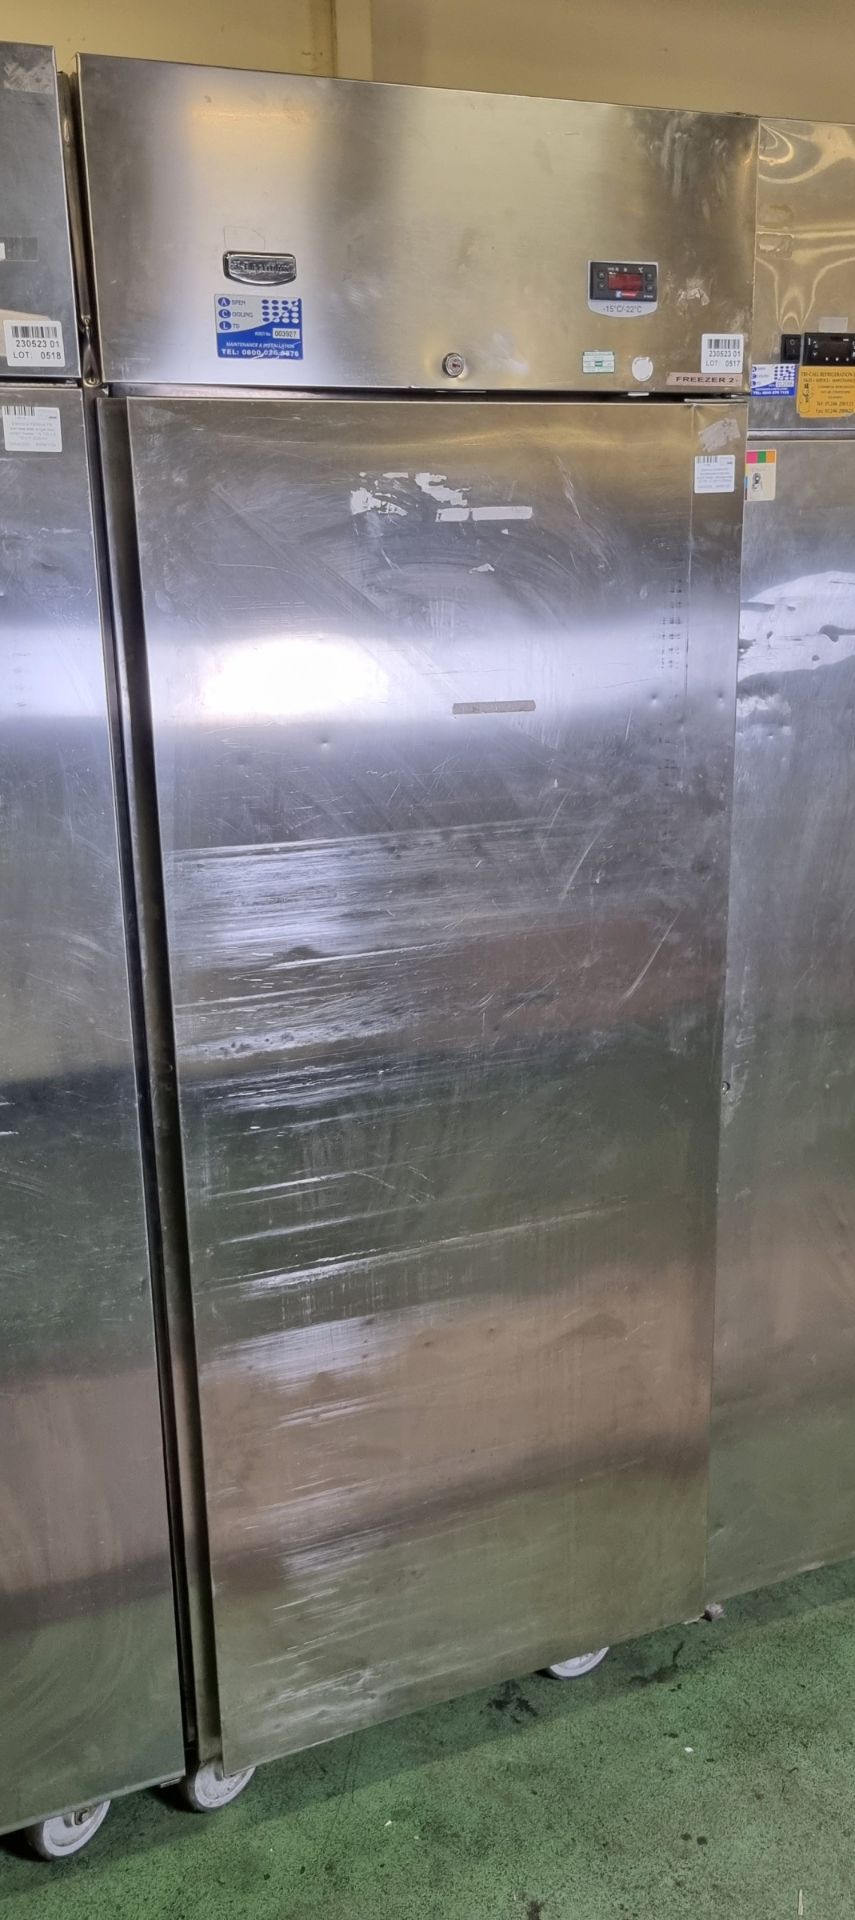 Electrolux RS06FX1FG stainless steel single door upright freezer - damaged sides - W 725 x D 790 - Image 2 of 3